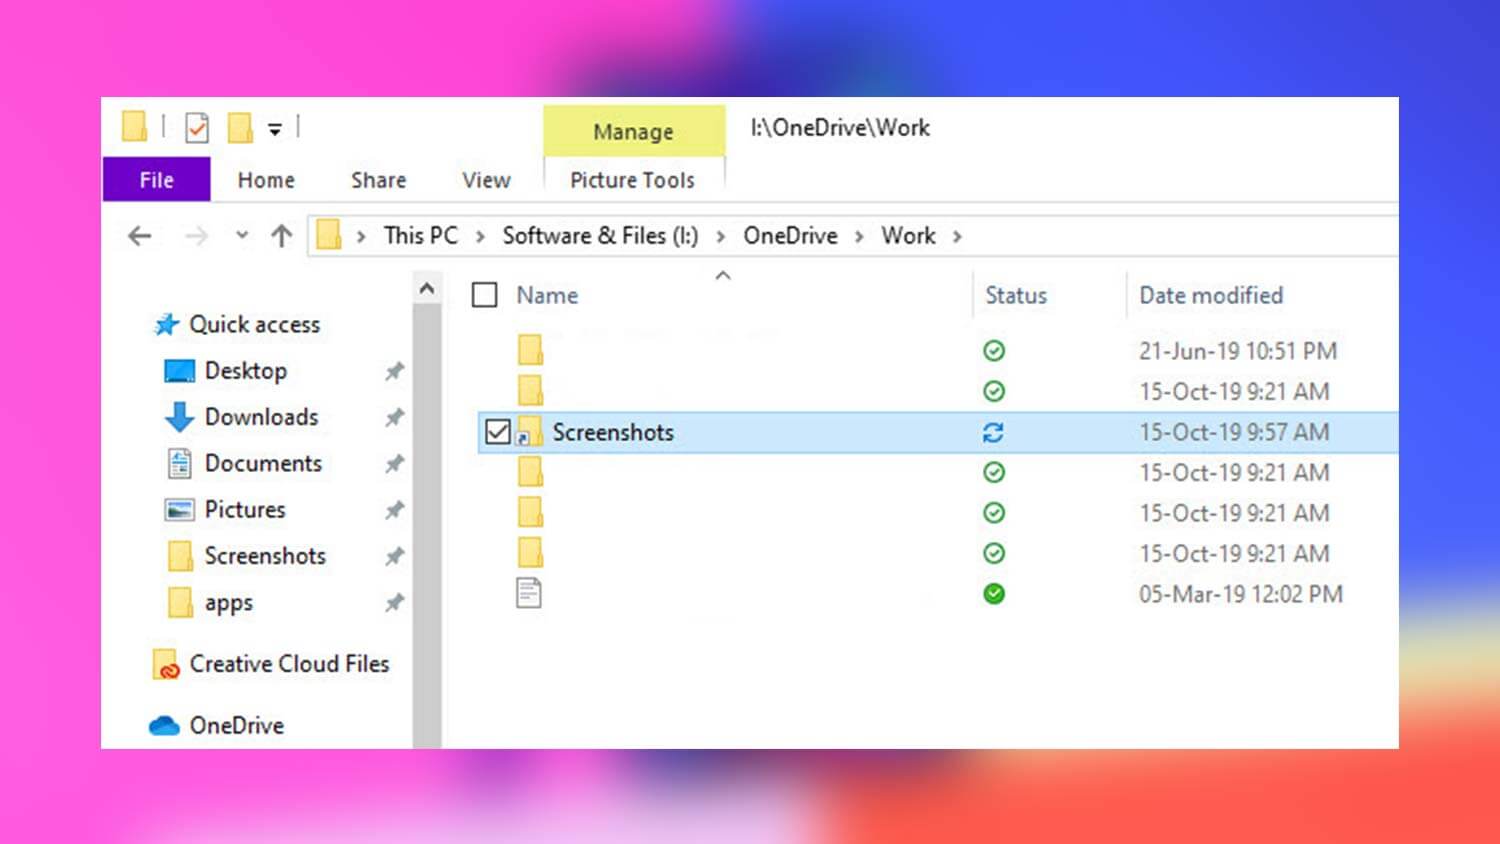 onedrive for business sync folders